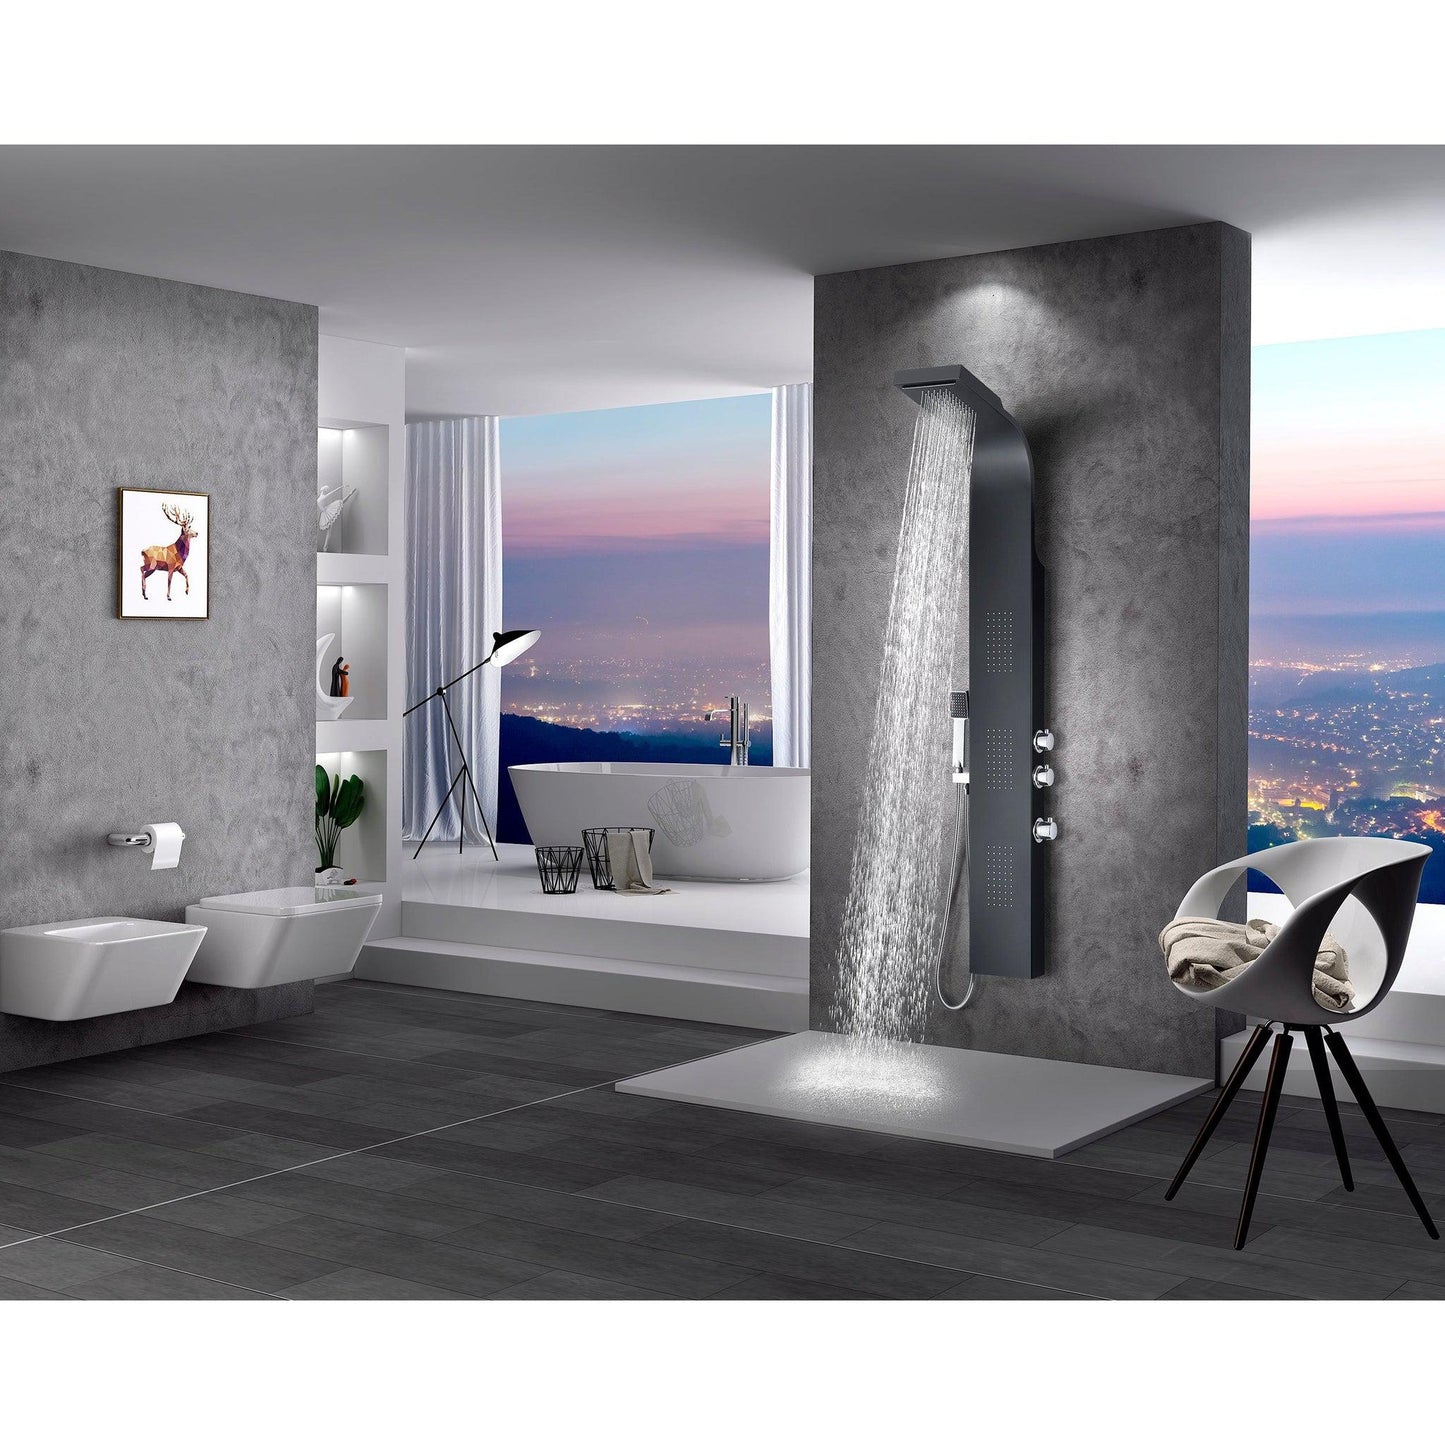 ANZZI Atoll Series 66" Black 3-Jetted Full Body Shower Panel With Heavy Rain Shower Head and Euro-Grip Hand Sprayer